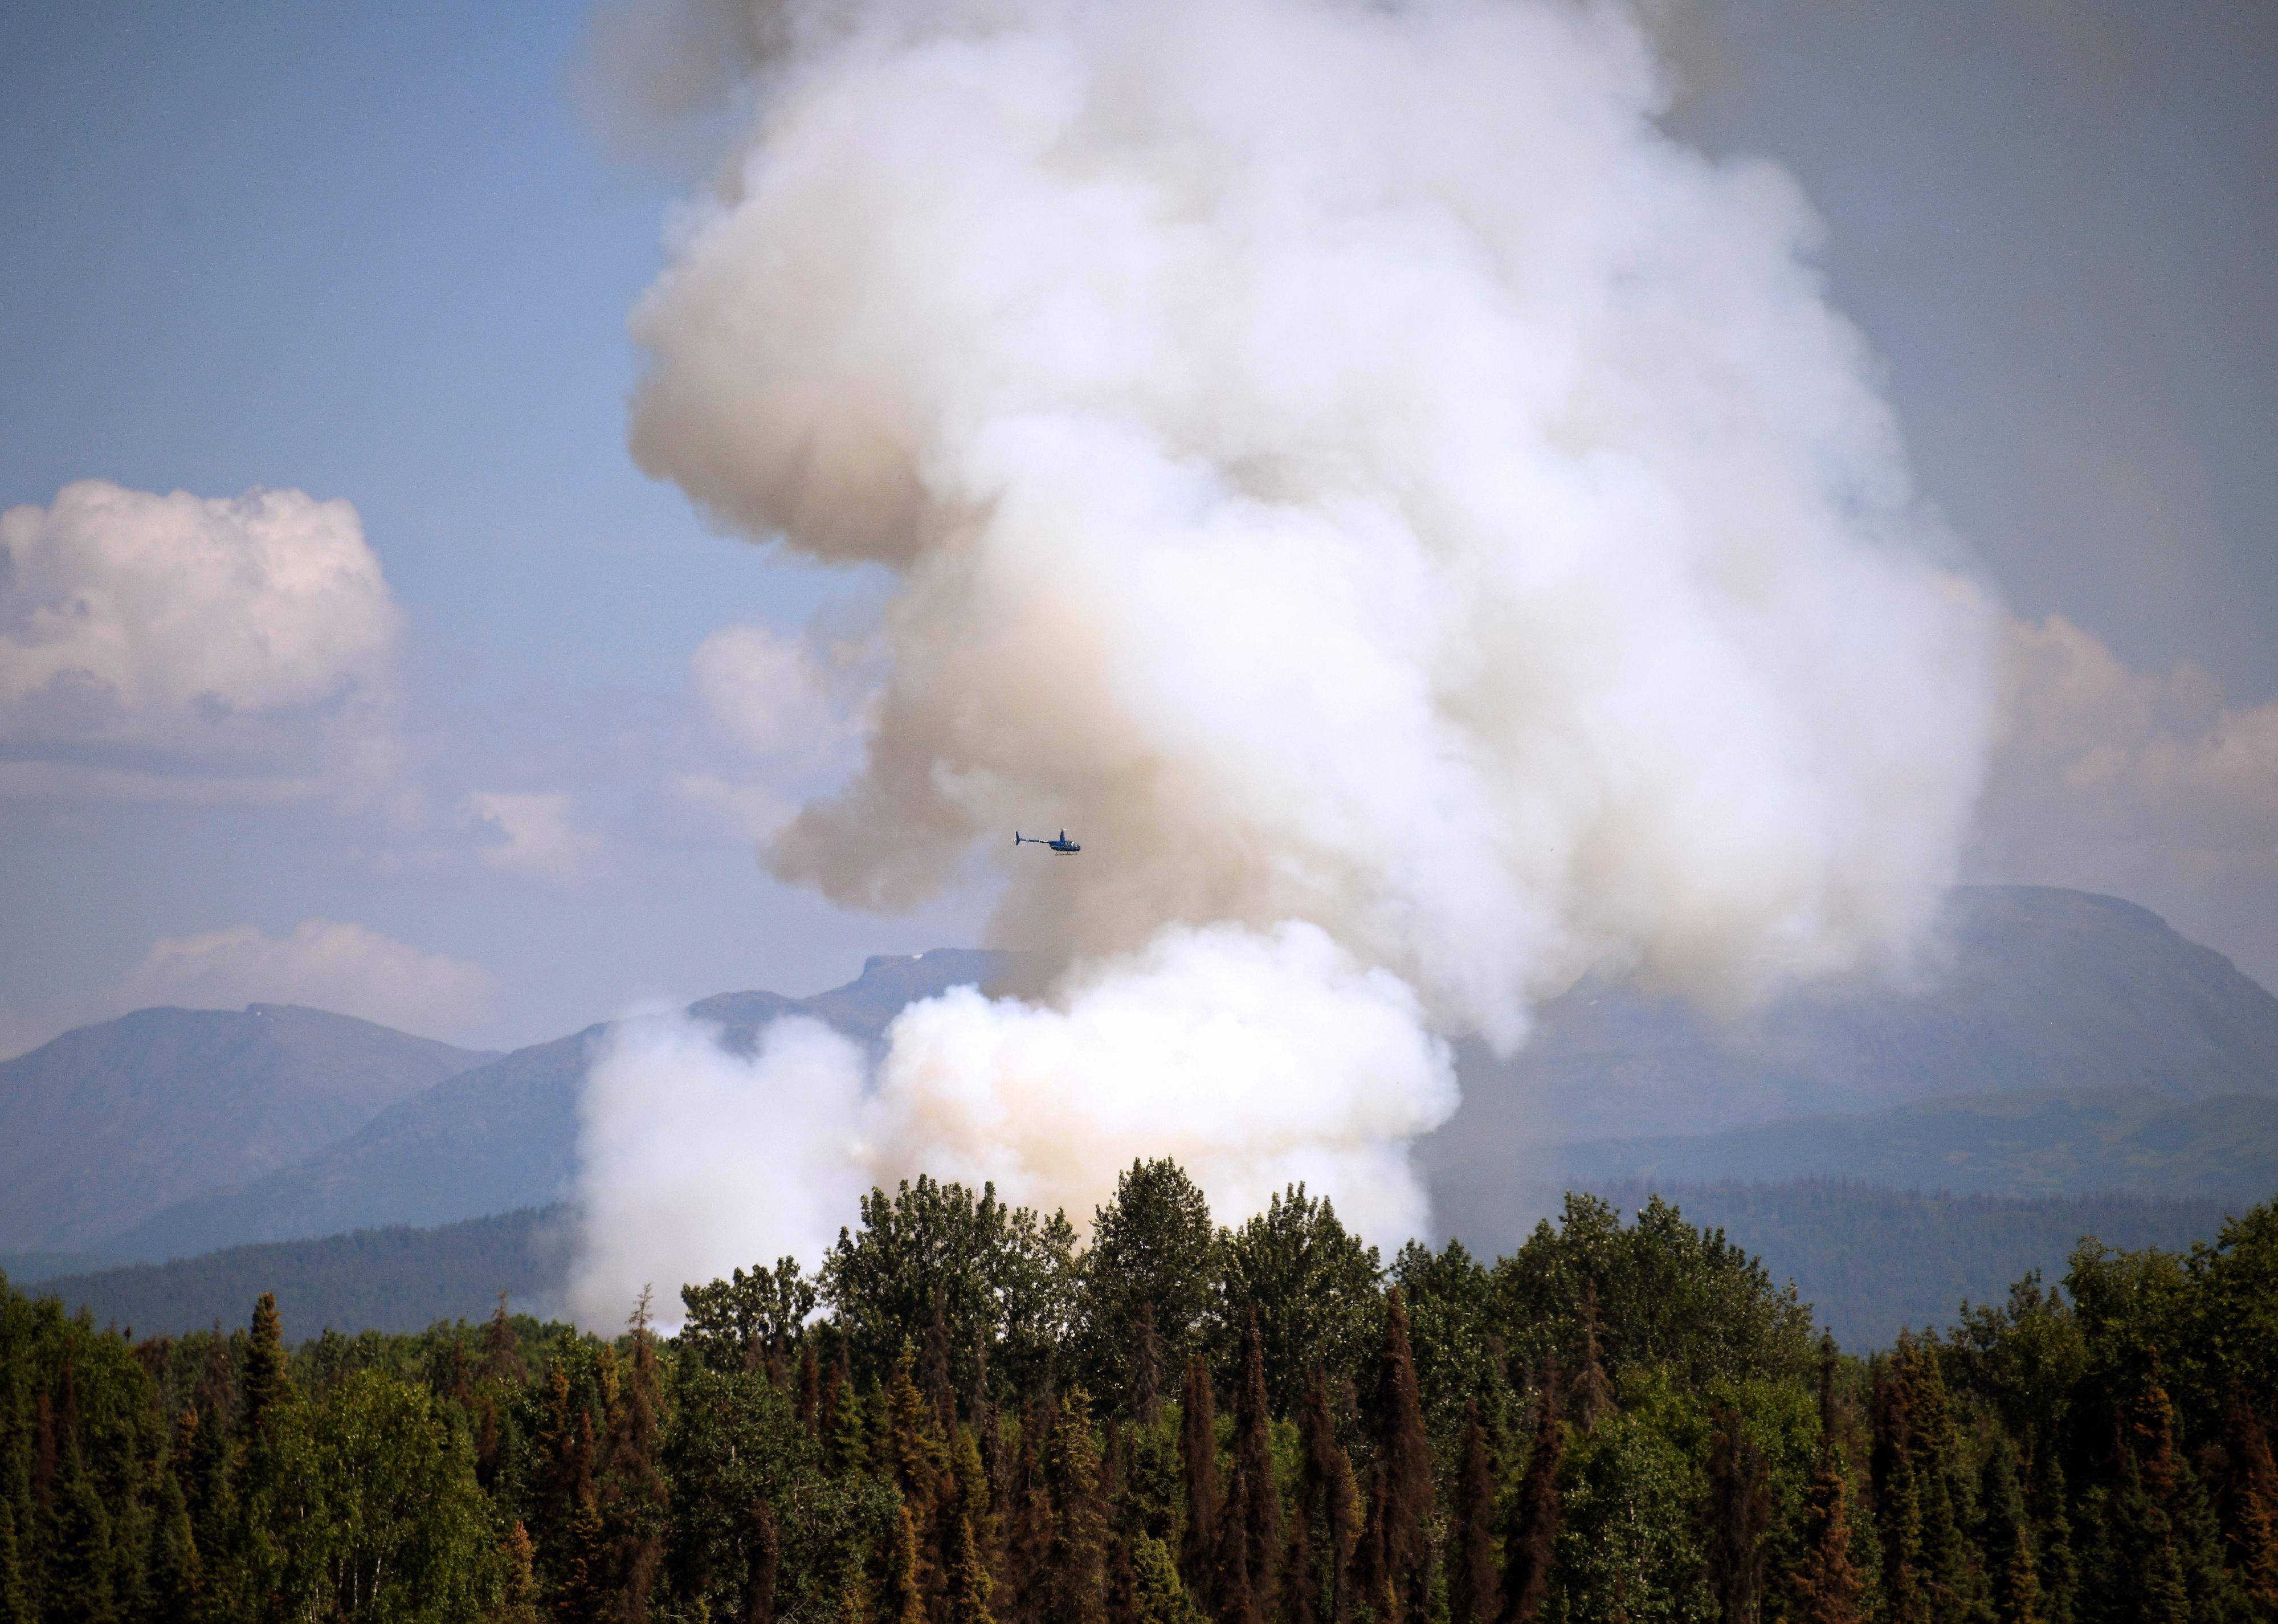 A helicopter passes by as smoke rises from a wildfire.